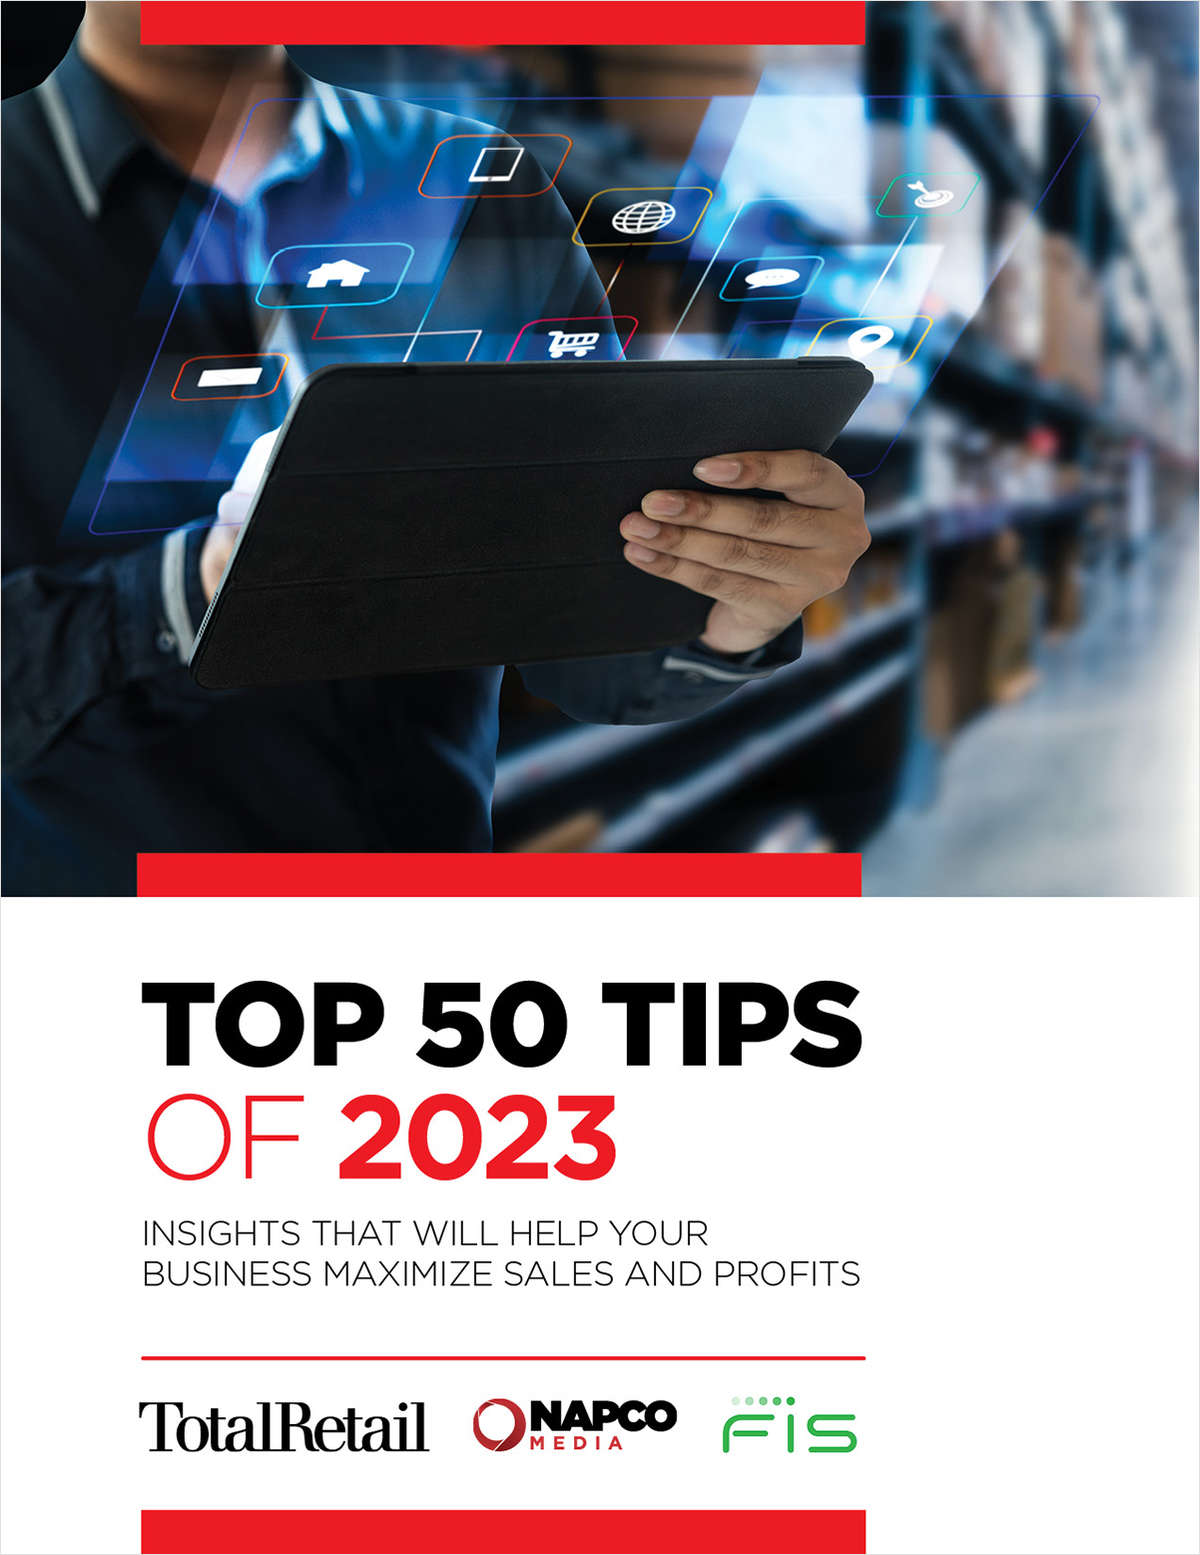 Top 50 Tips of 2023